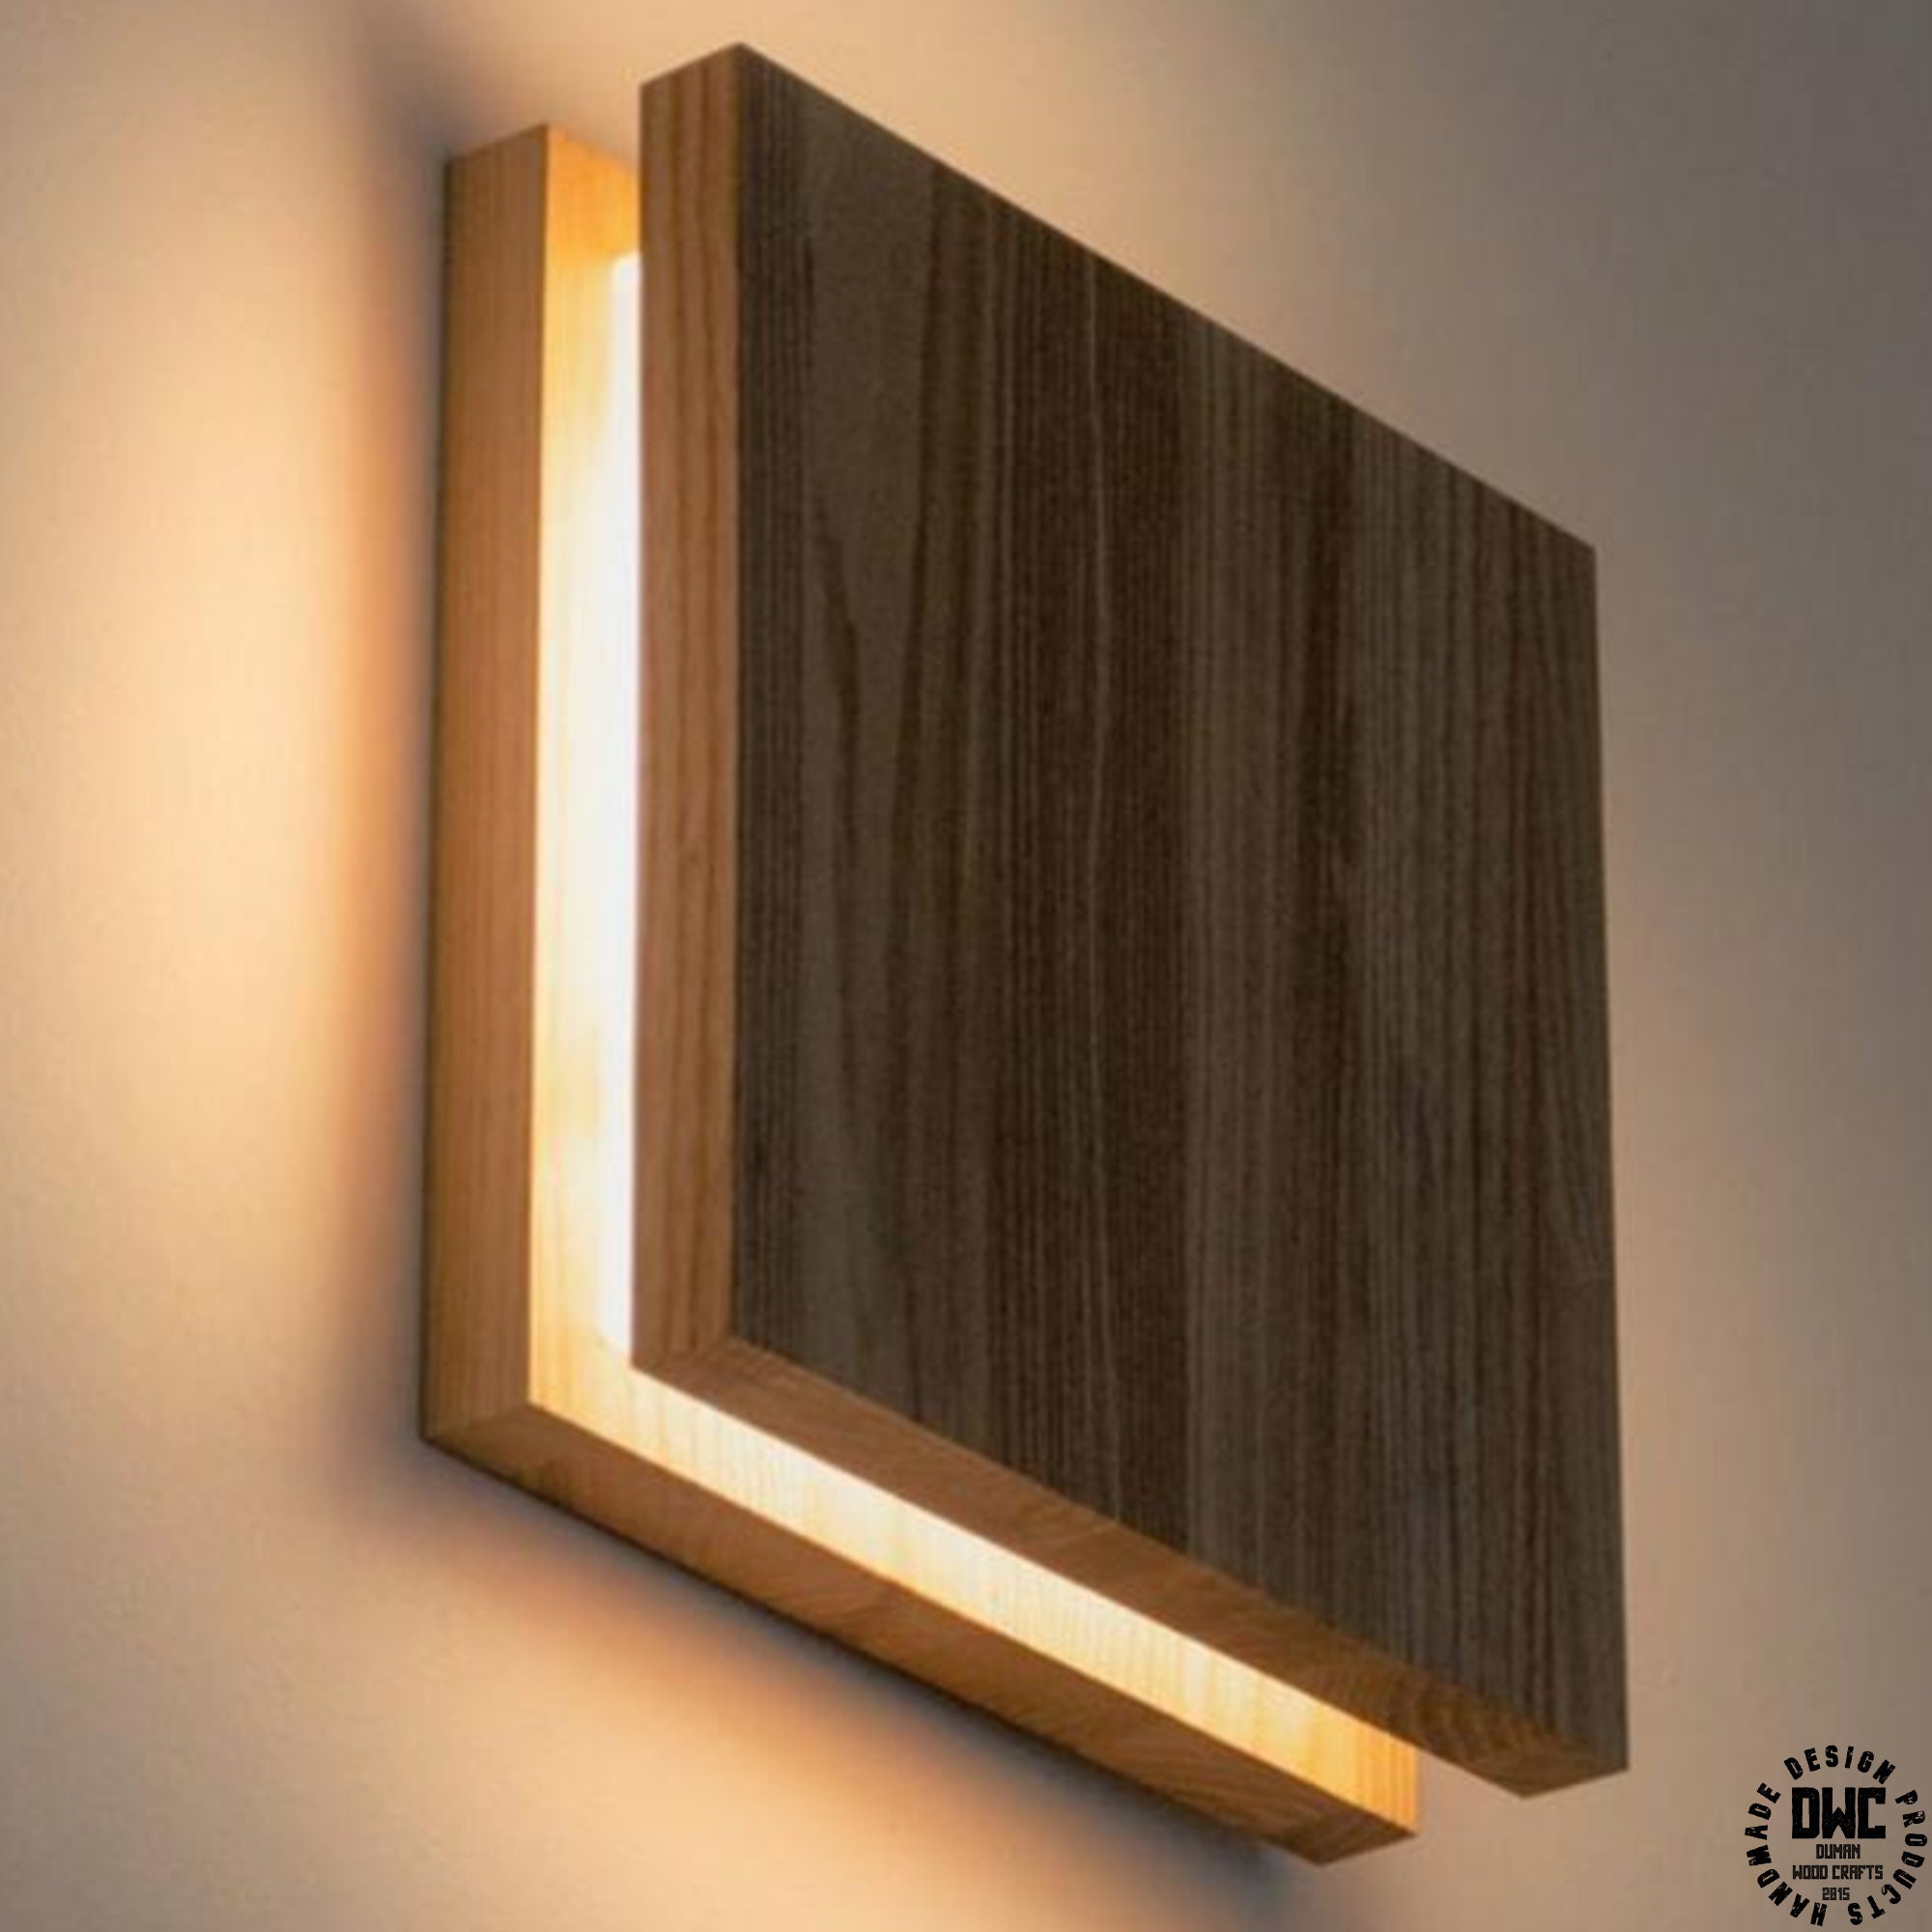 Buy Rustic Square Led Wall Lamp Wooden Wall Online in India - Etsy